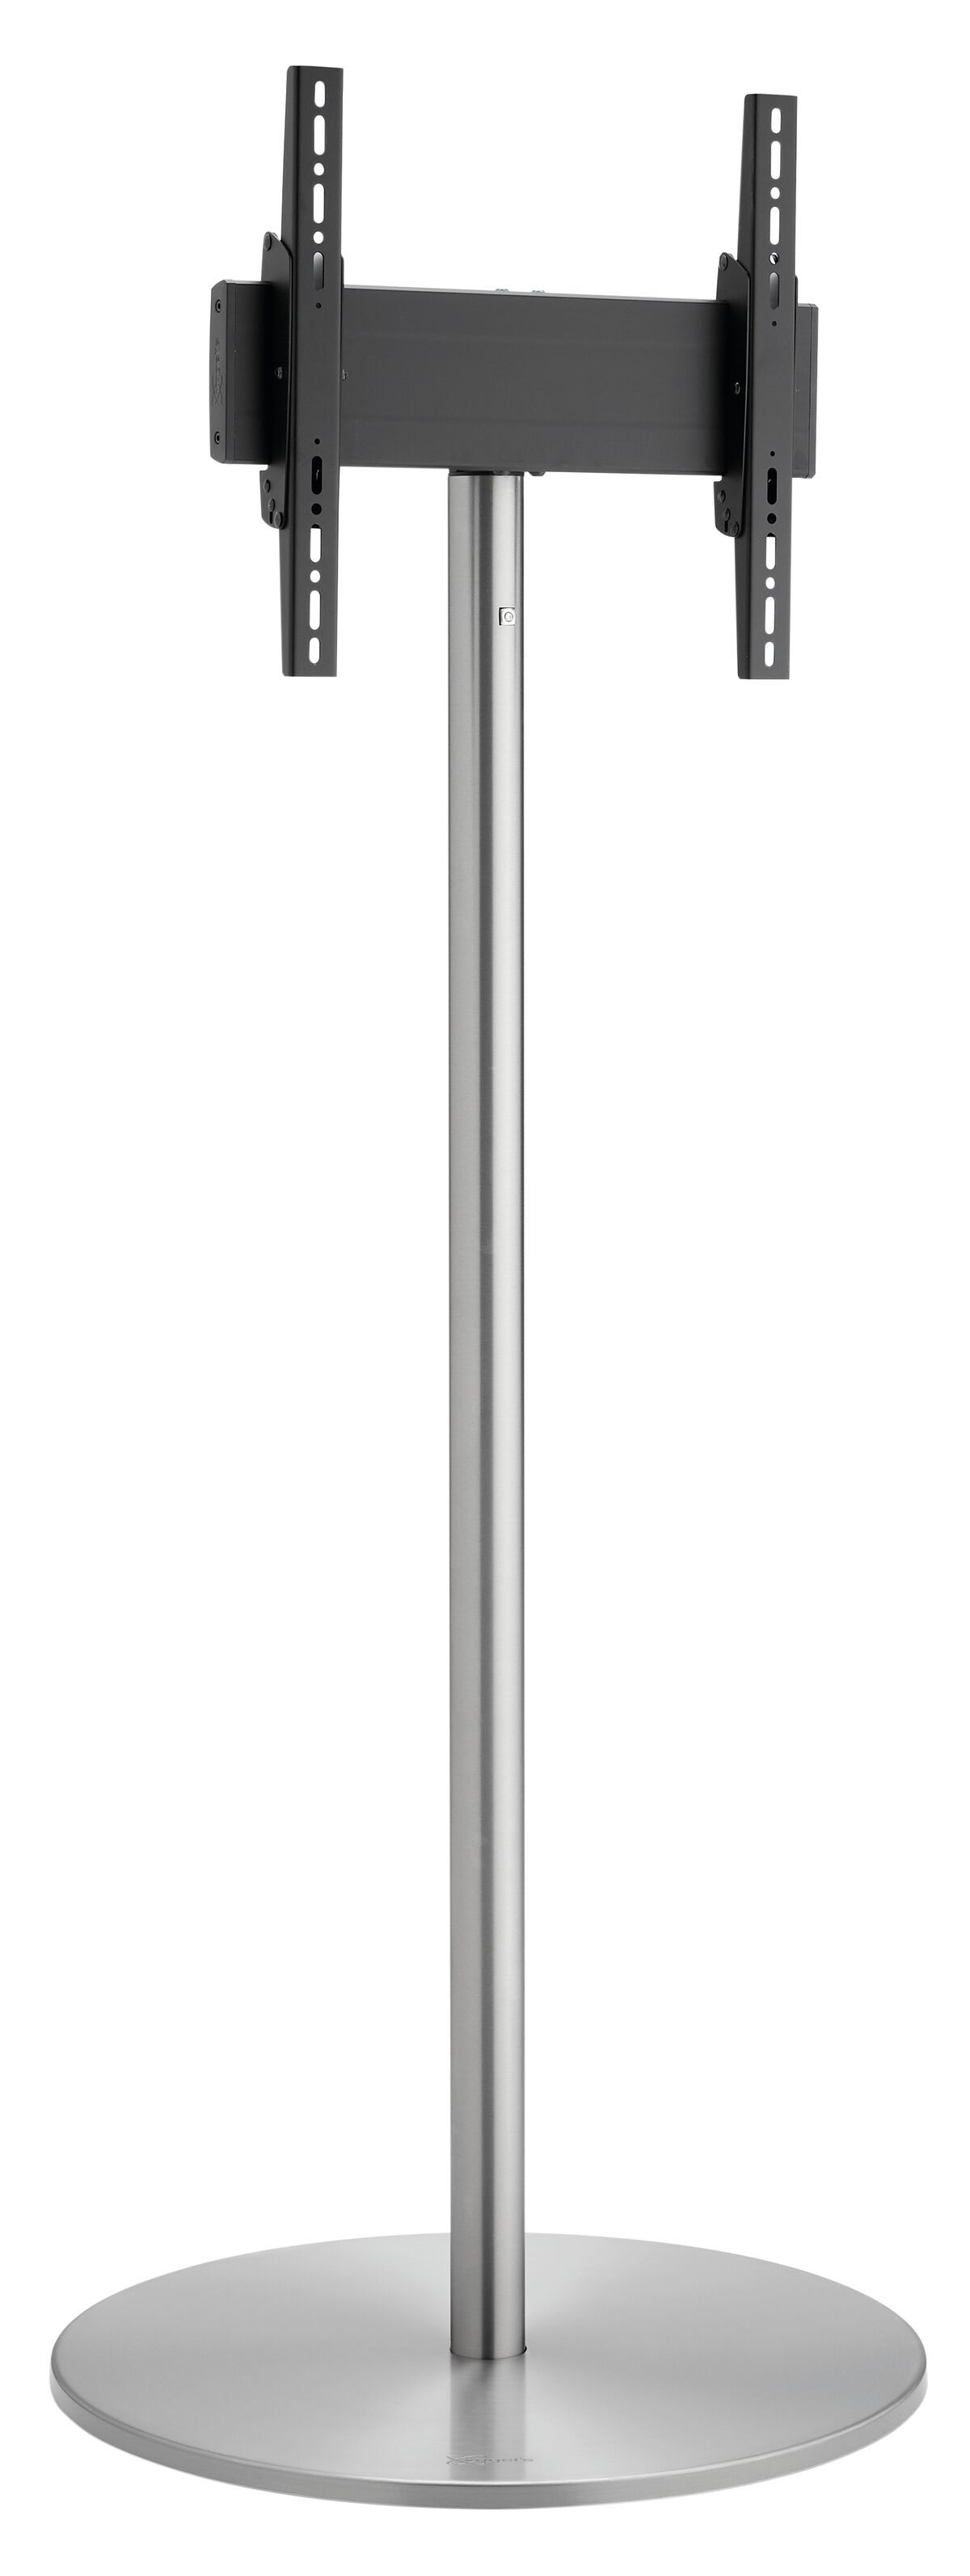 Vogel's F1644RVS Floor stand - Product